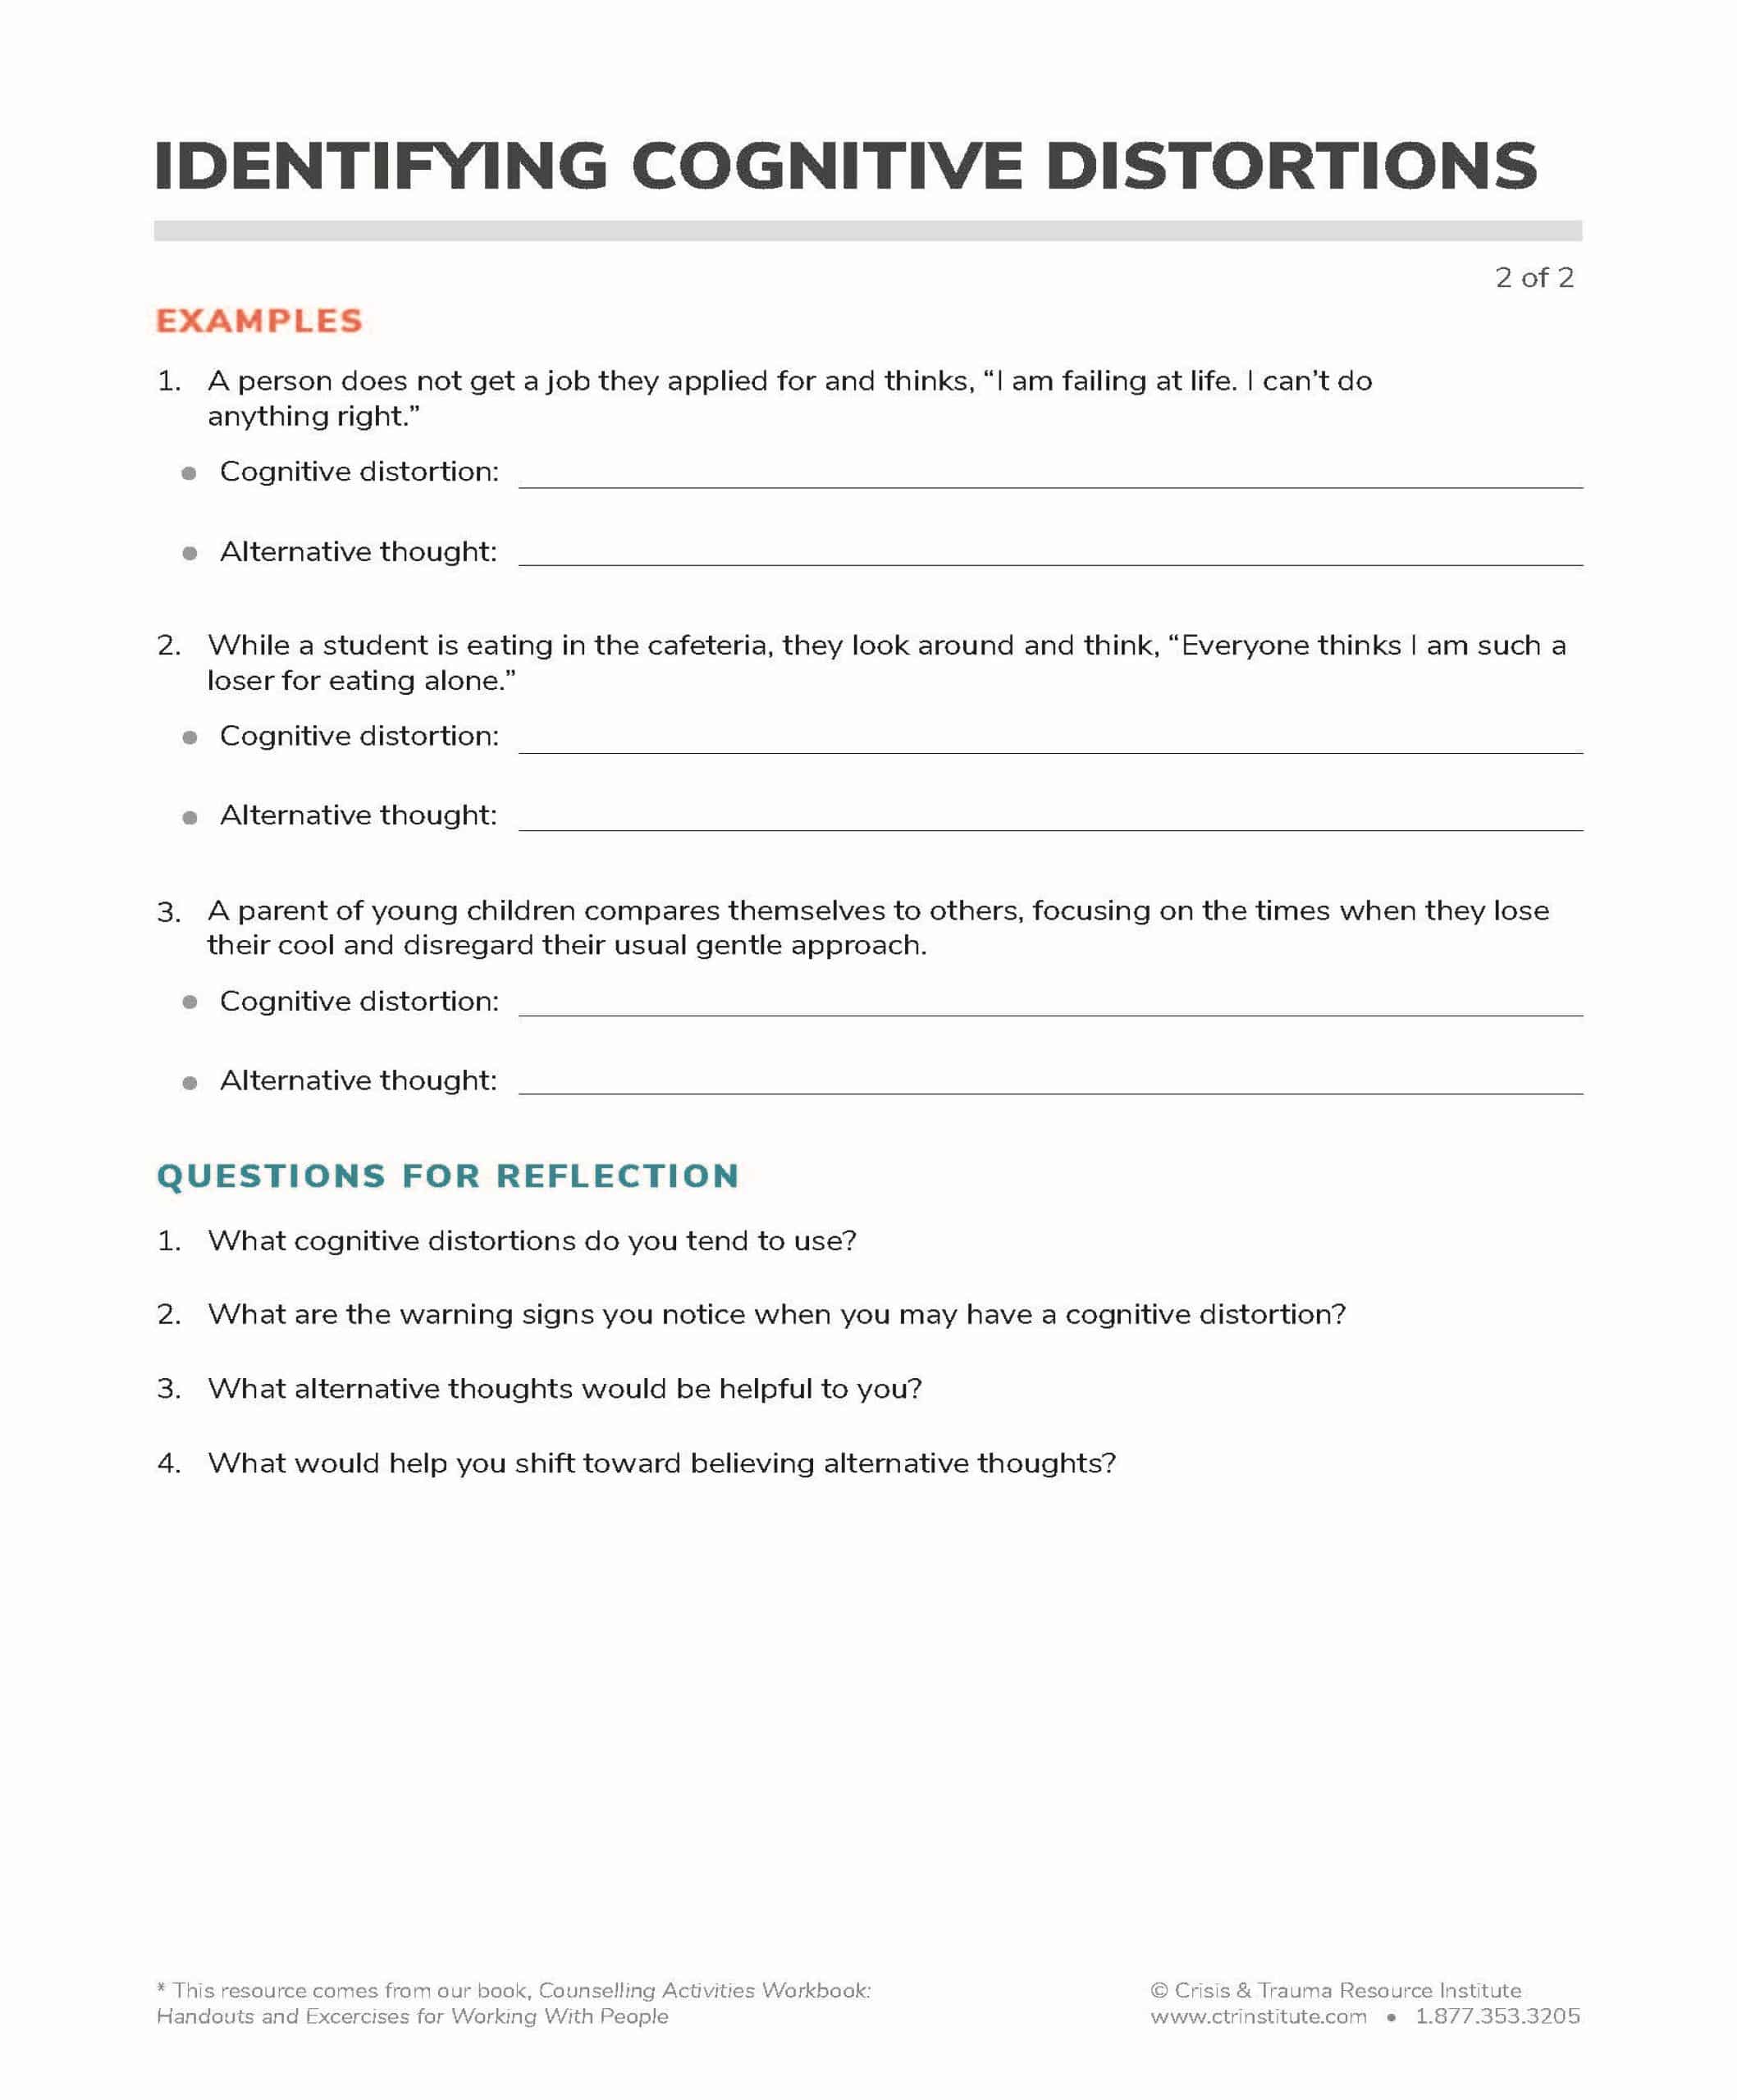 Identifying Cognitive Distortions Free Printable Handout Image